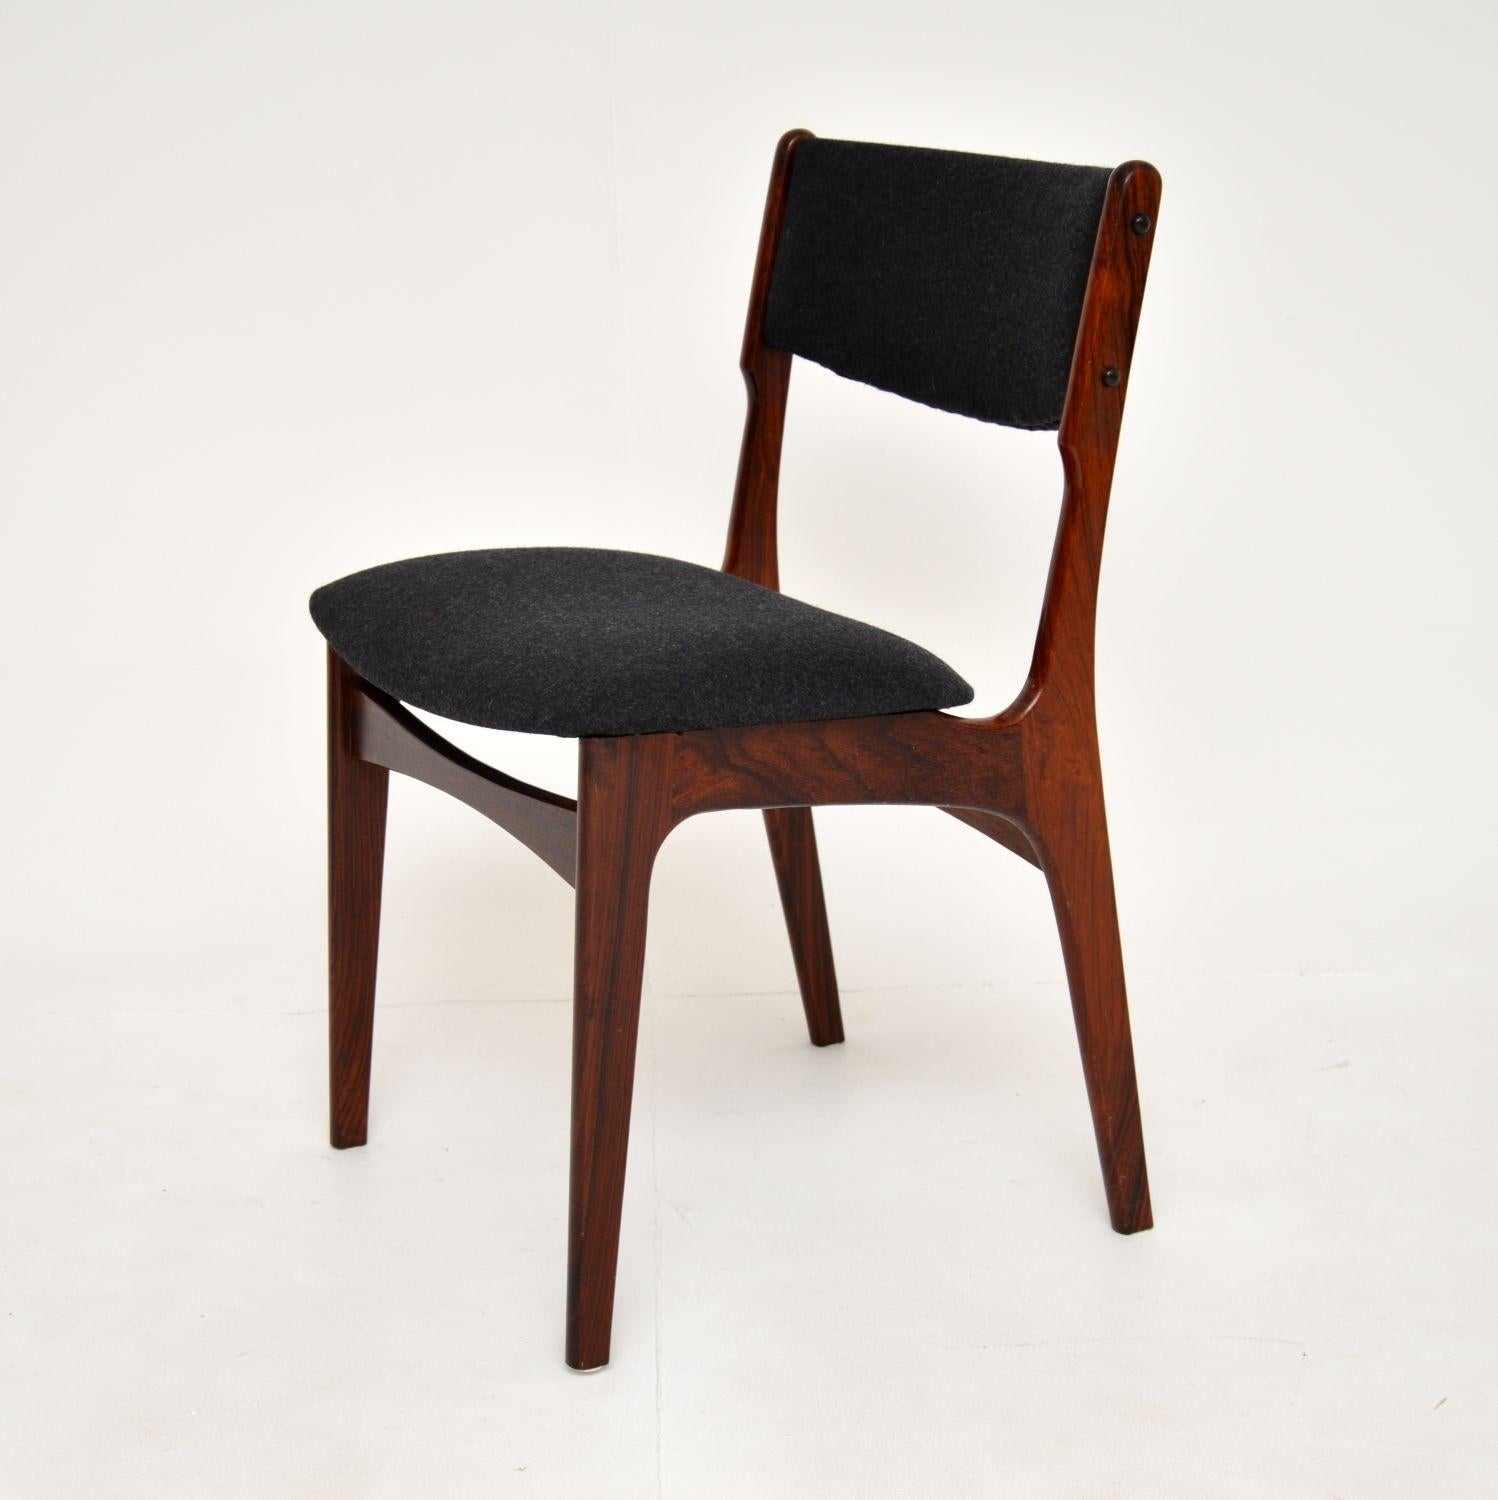 A stylish and extremely well made Danish chair in solid wood. This was designed by Erik Buch, it was made in Denmark in the 1960’s.

They quality is superb, this is very well built, comfortable and supportive. Is is perfect for use as a desk